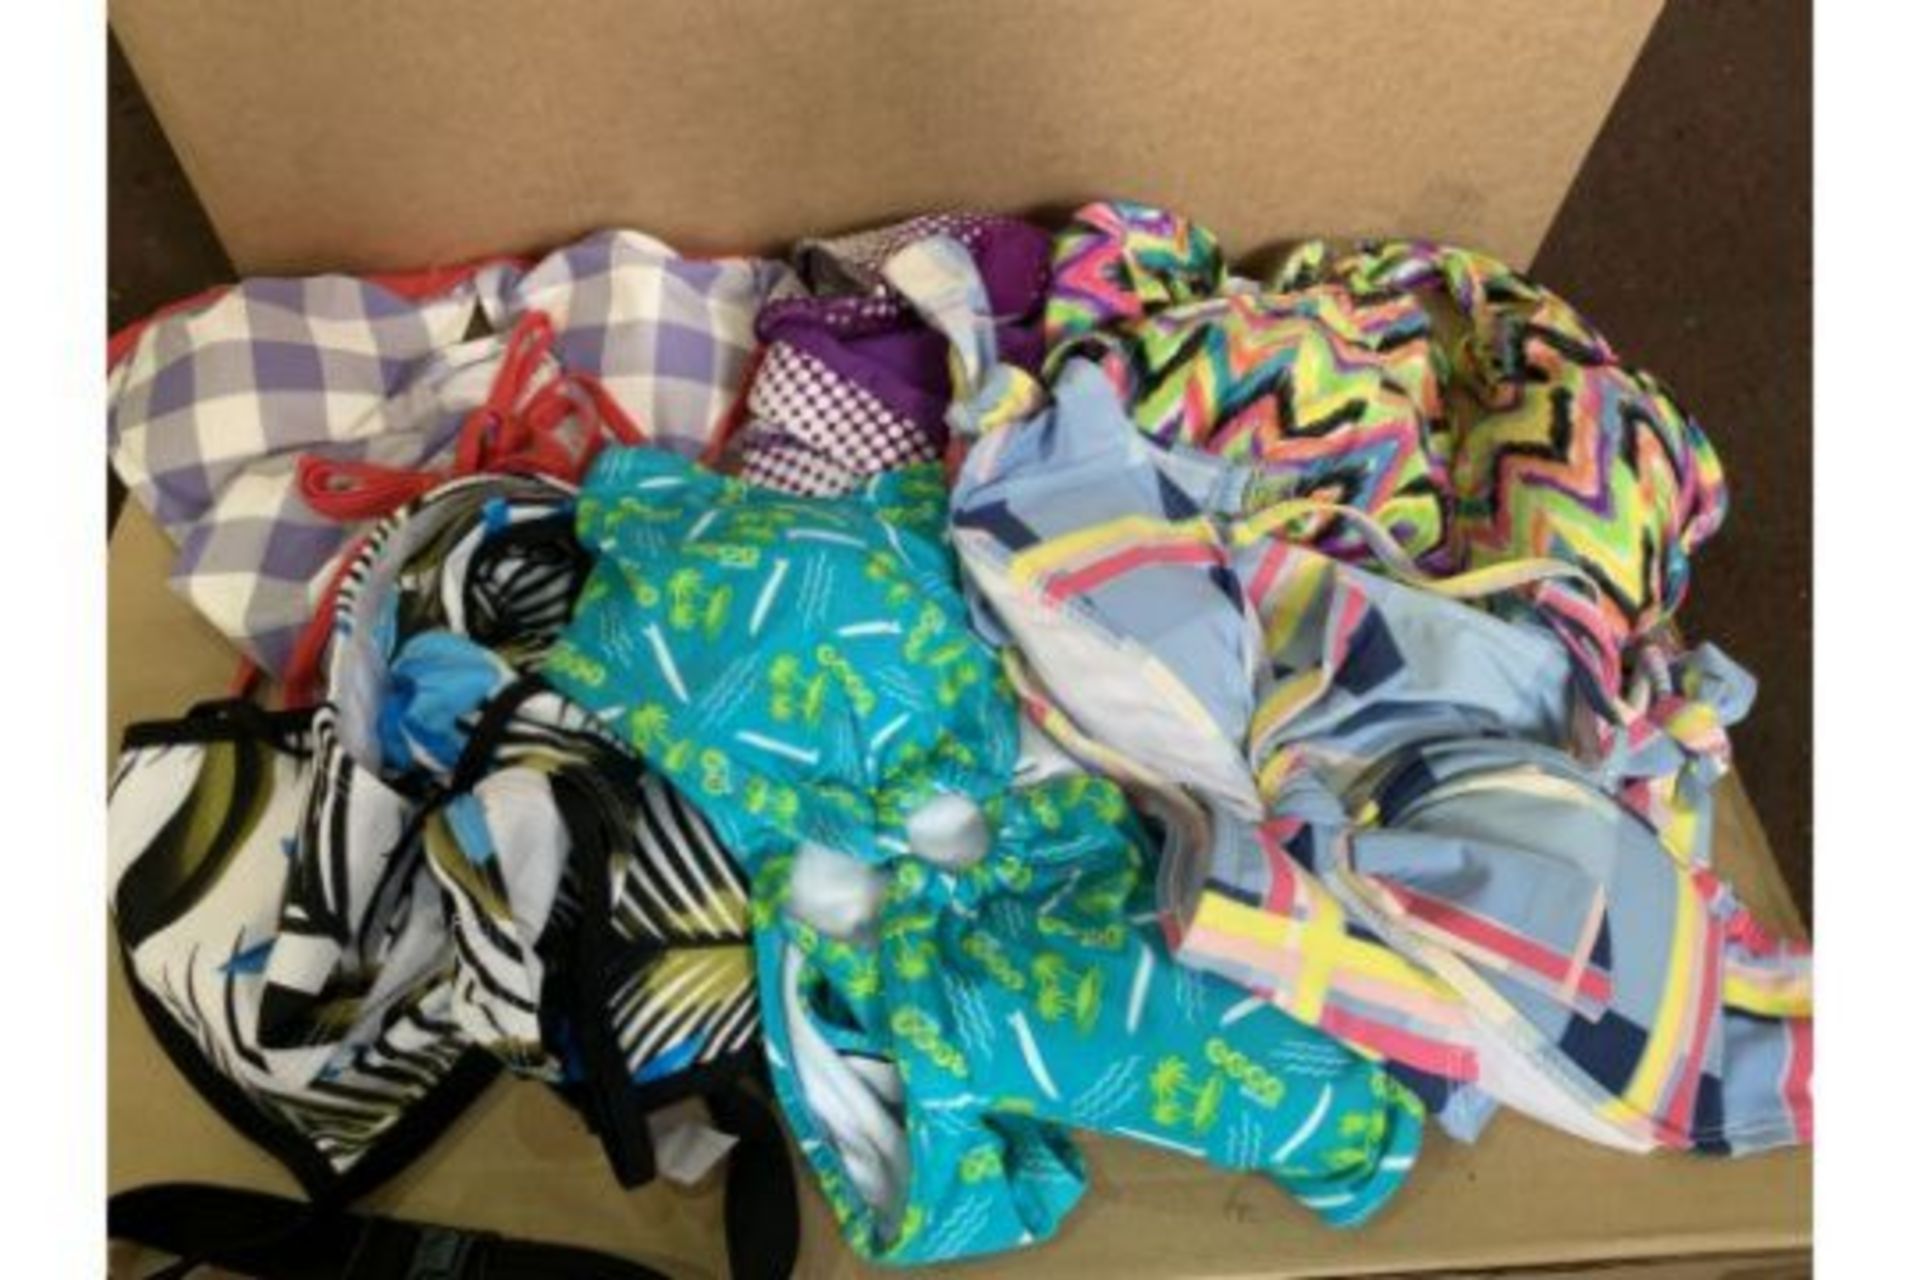 50 X BRAND NEW SWIMSUITS/BIKINIS IN VARIOUS STYLES AND SIZES R15